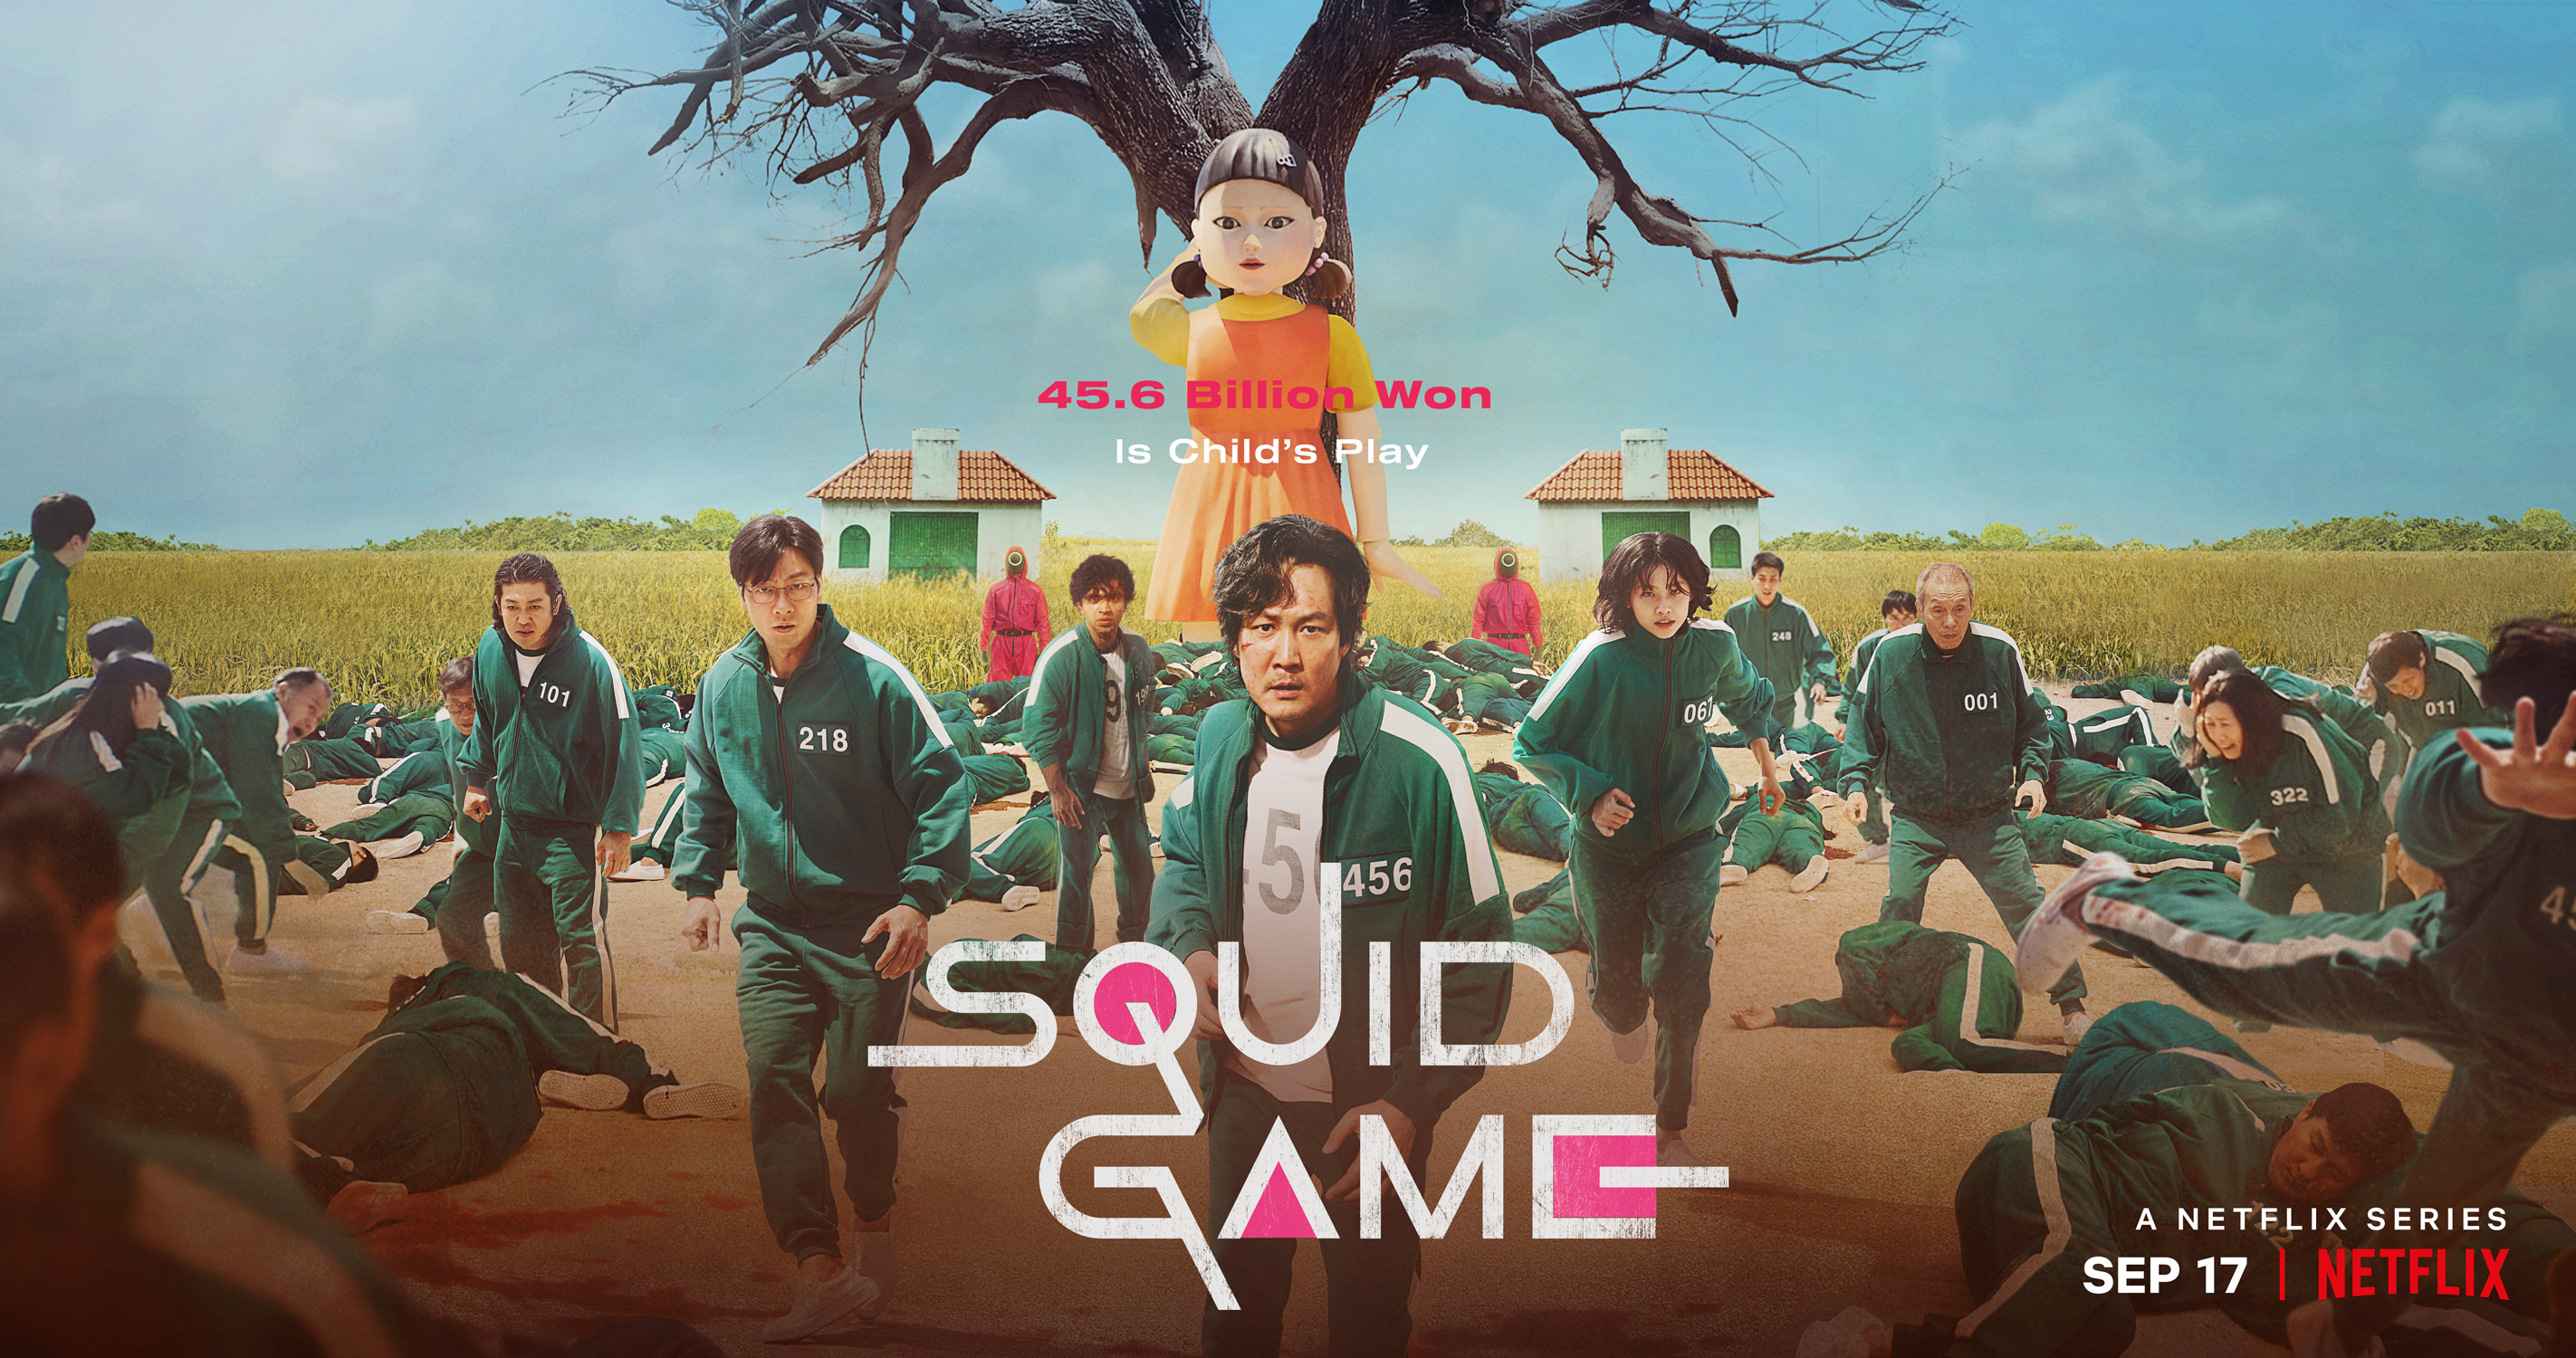 Netflix 'Squid Game' poster with players in green track suits in front of giant robotic doll